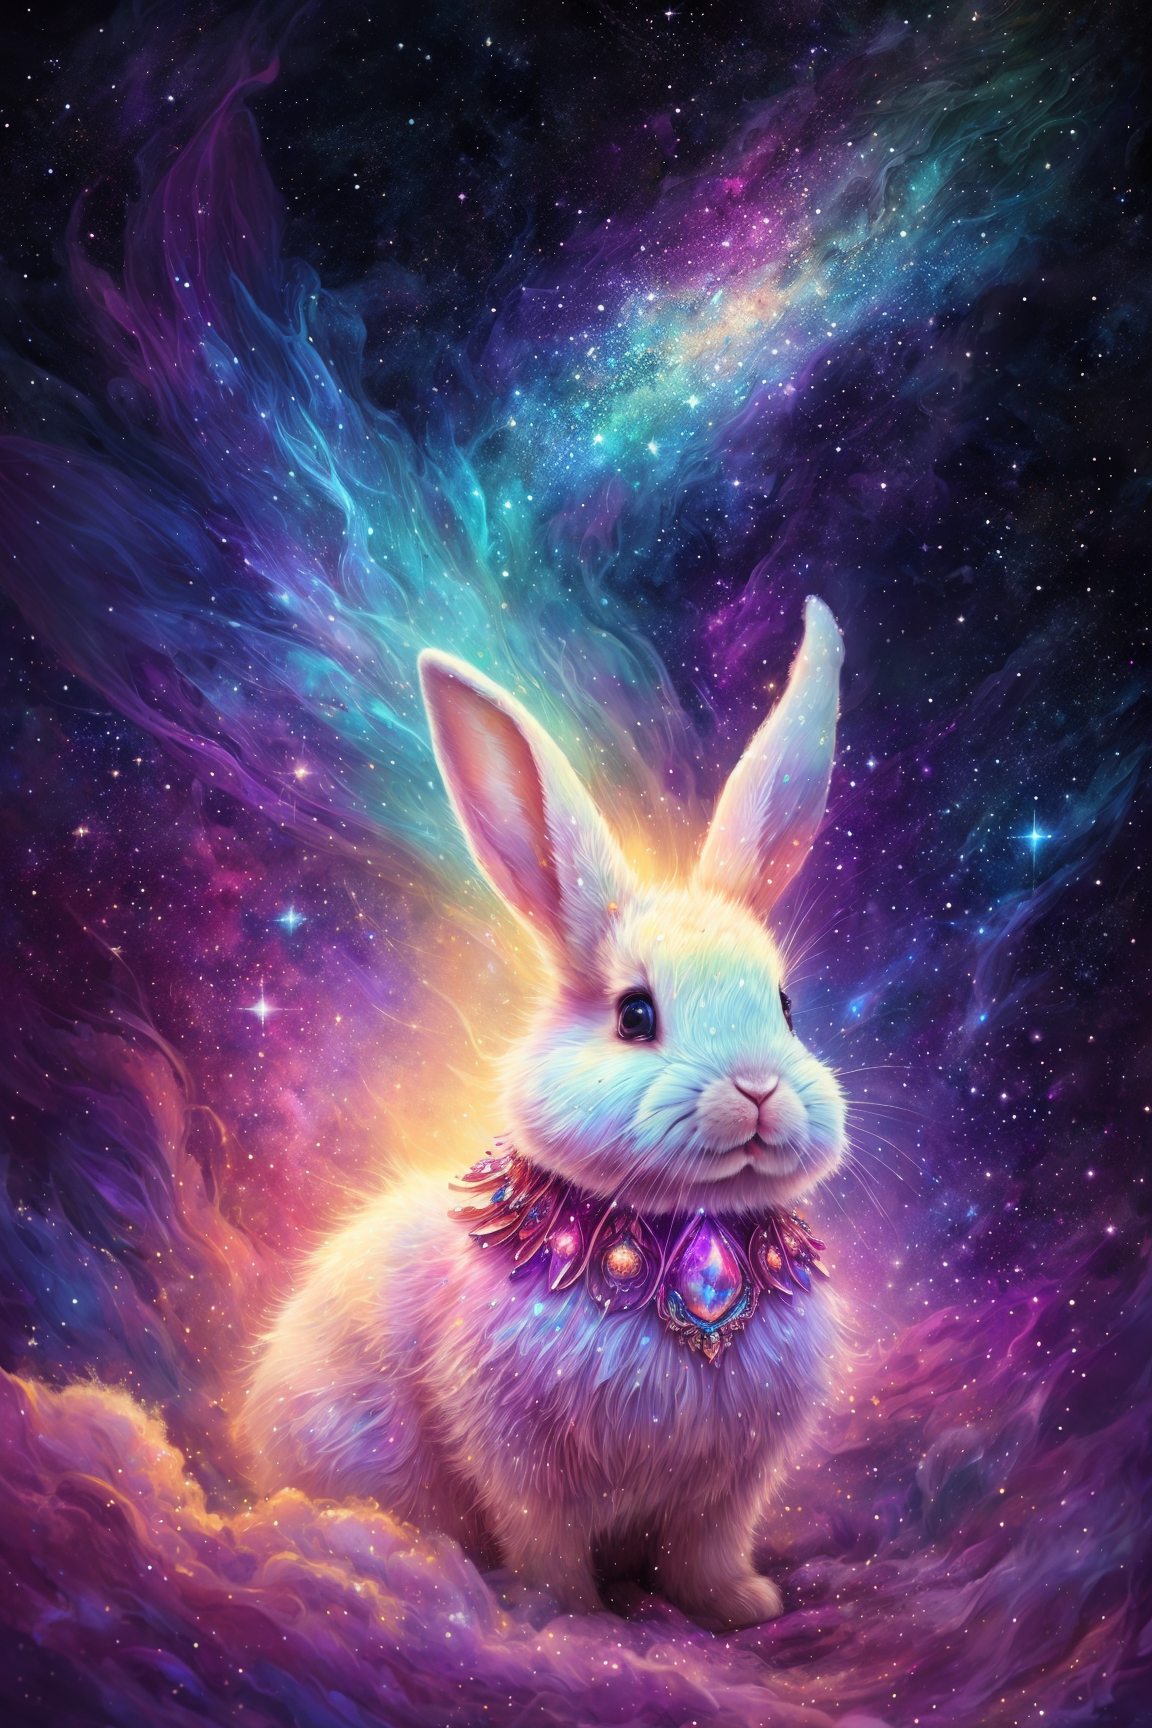 splash art of an up close portrait of a nebulae bunny floating in sparkling space clouds, wearing a jeweled collar, made o...